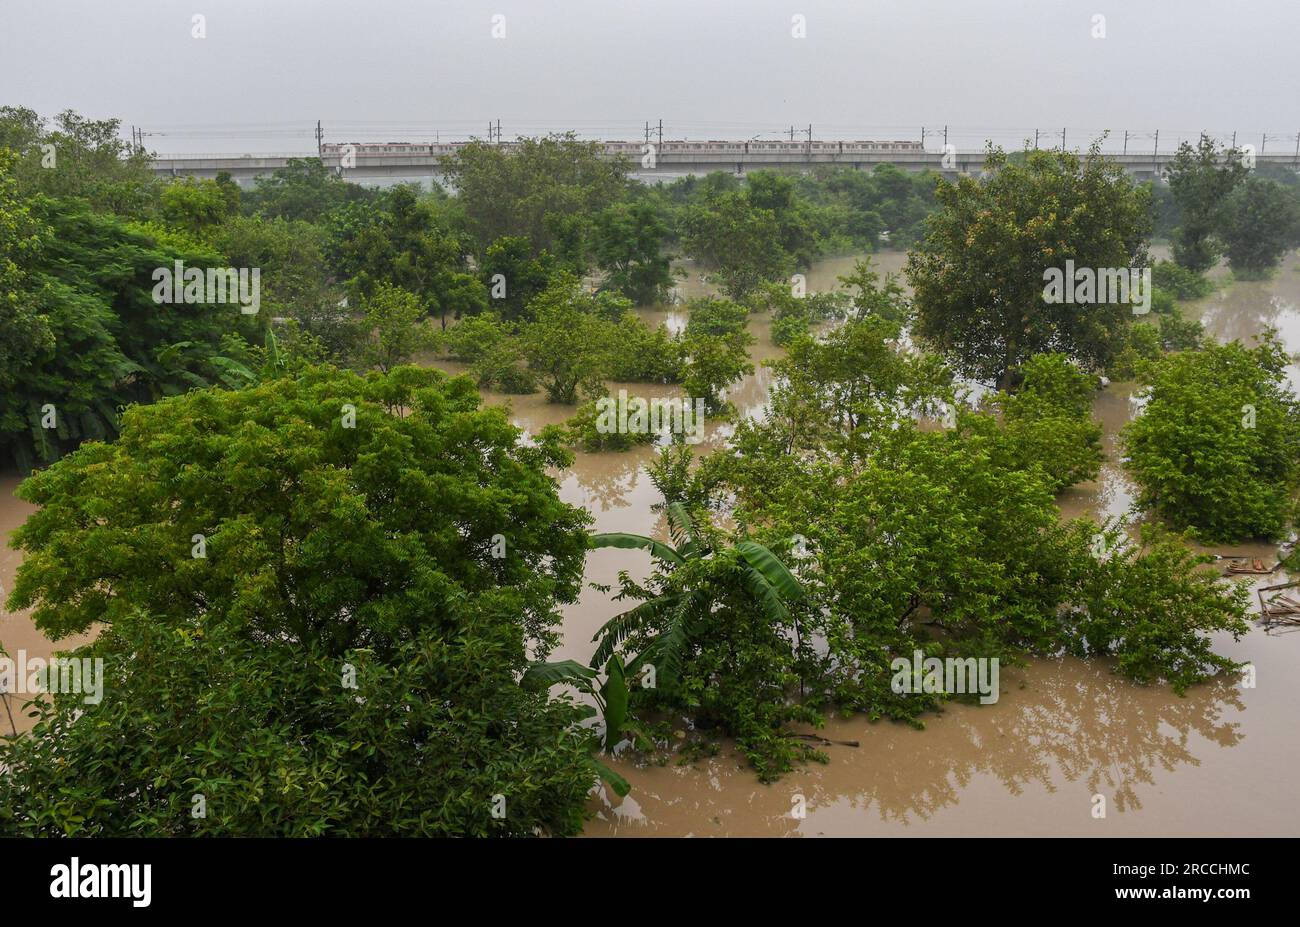 New Delhi, India. 12th July, 2023. General view of a low-lying area flooded by the rising water level of the Yamuna River after heavy monsoon rains in New Delhi. Yamuna water level in Delhi reaches all-time high of 207.55 meters. The government warned of flood-like conditions and asked residents of the riverbed and low-lying areas to evacuate their homes. (Photo by Biplov Bhuyan/SOPA Images/Sipa USA) Credit: Sipa USA/Alamy Live News Stock Photo